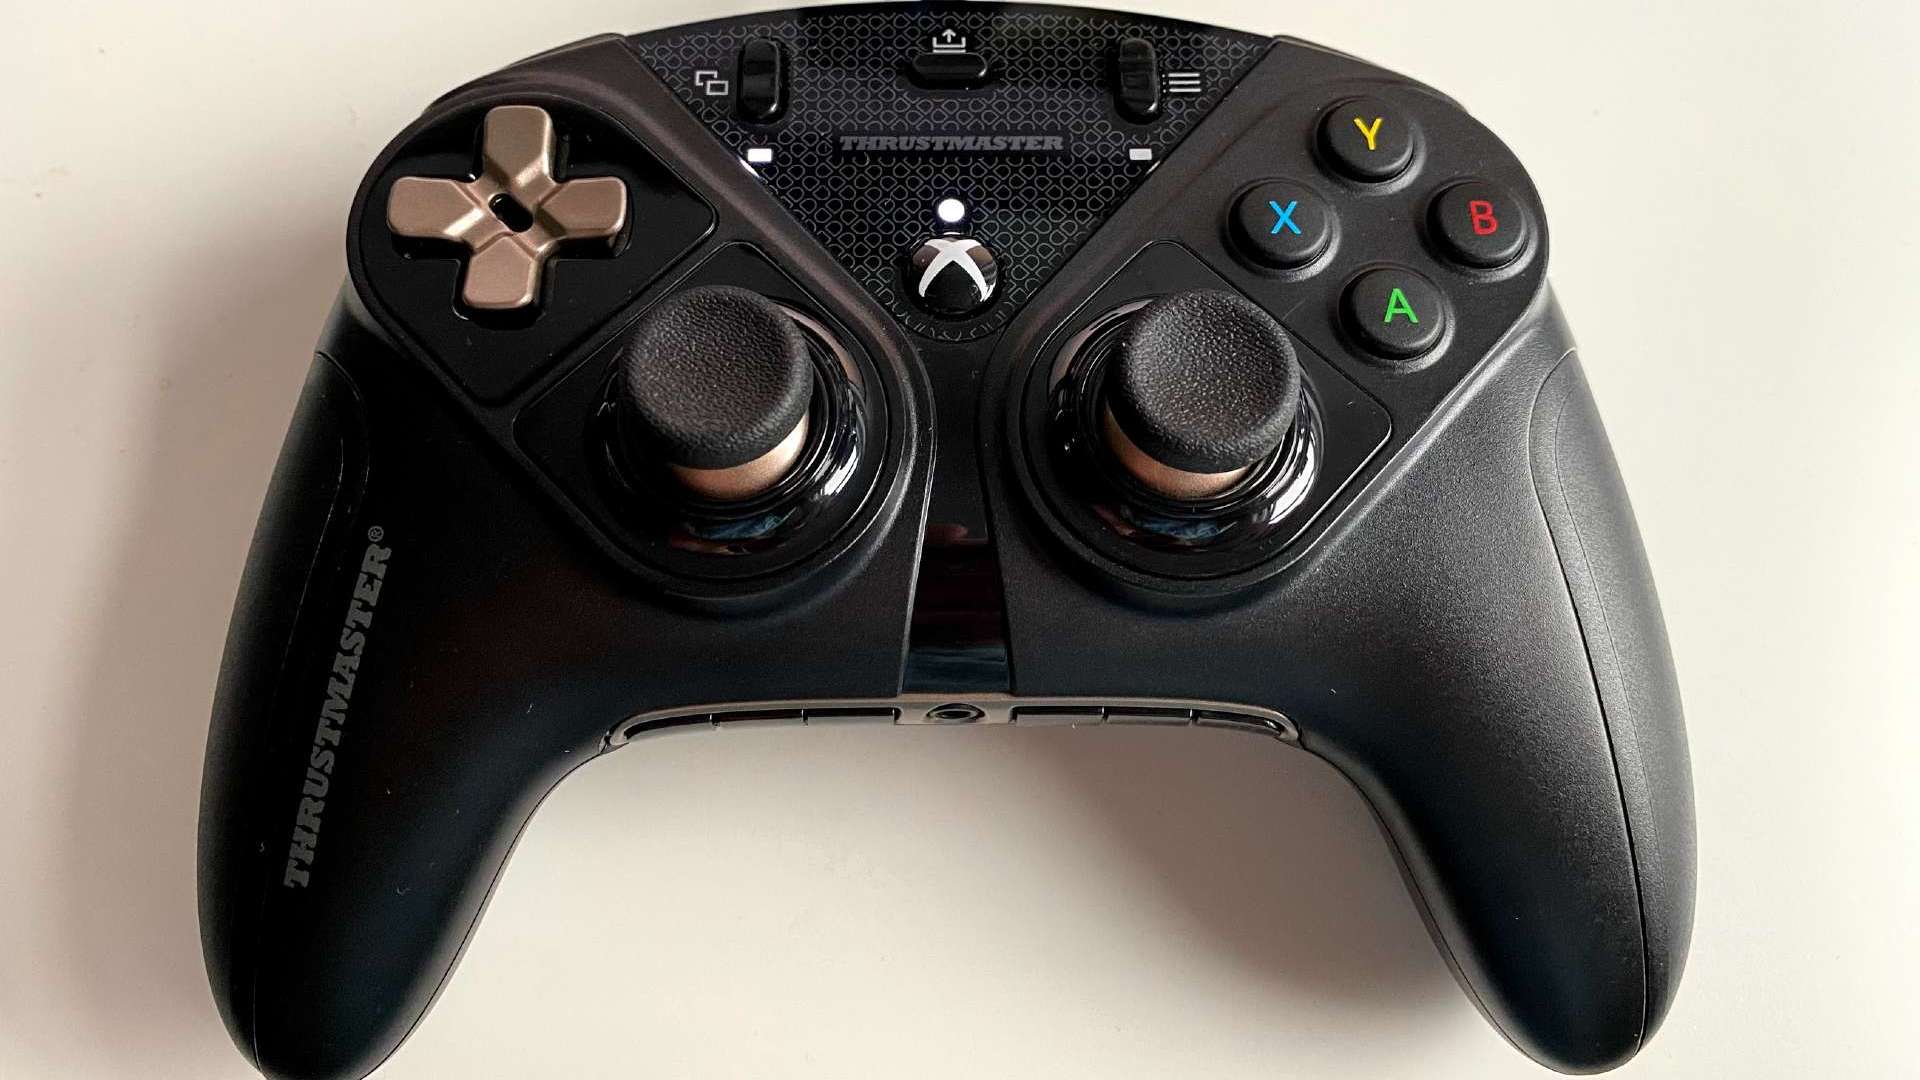 Thrustmaster Eswap X Pro review – is the future of controllers